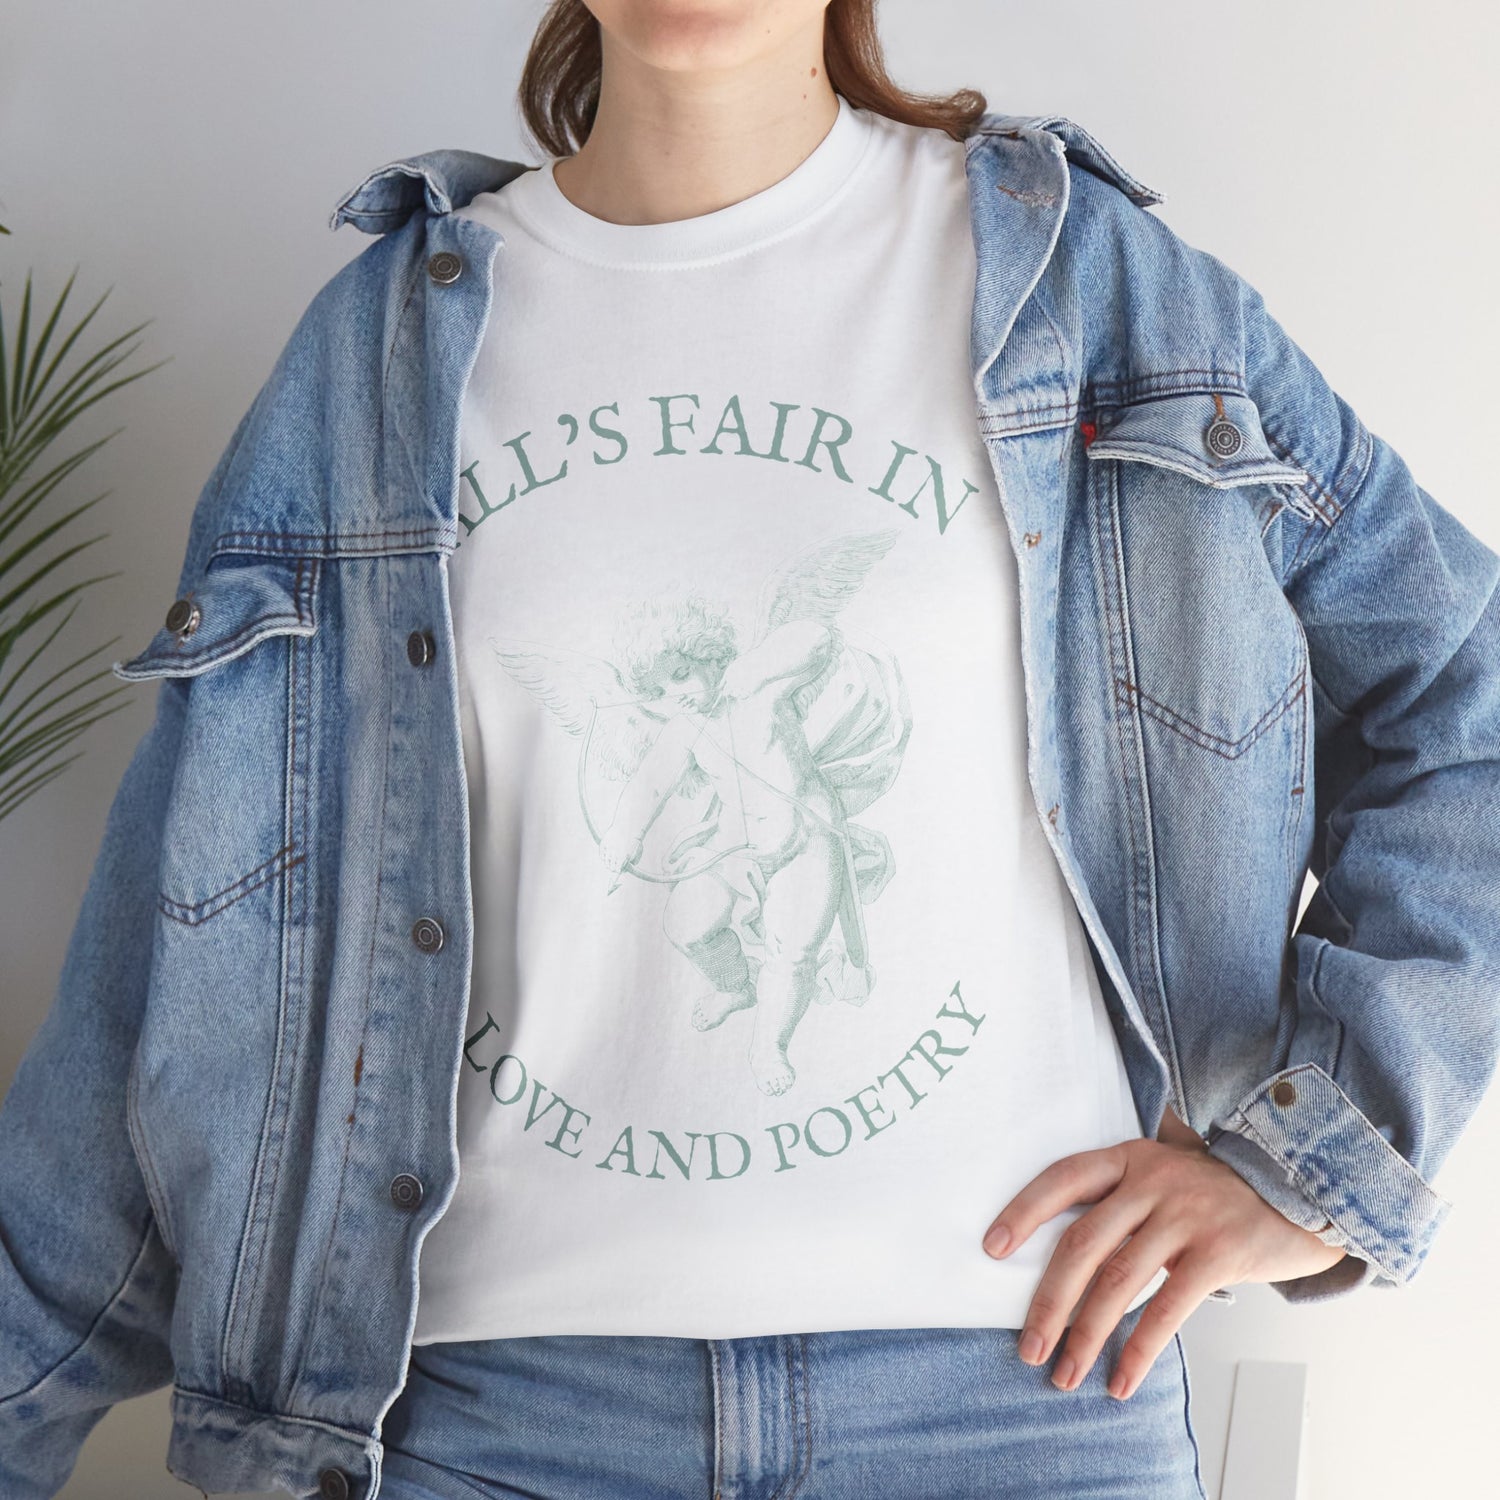 All's Fair in Love and Poetry T-Shirt White